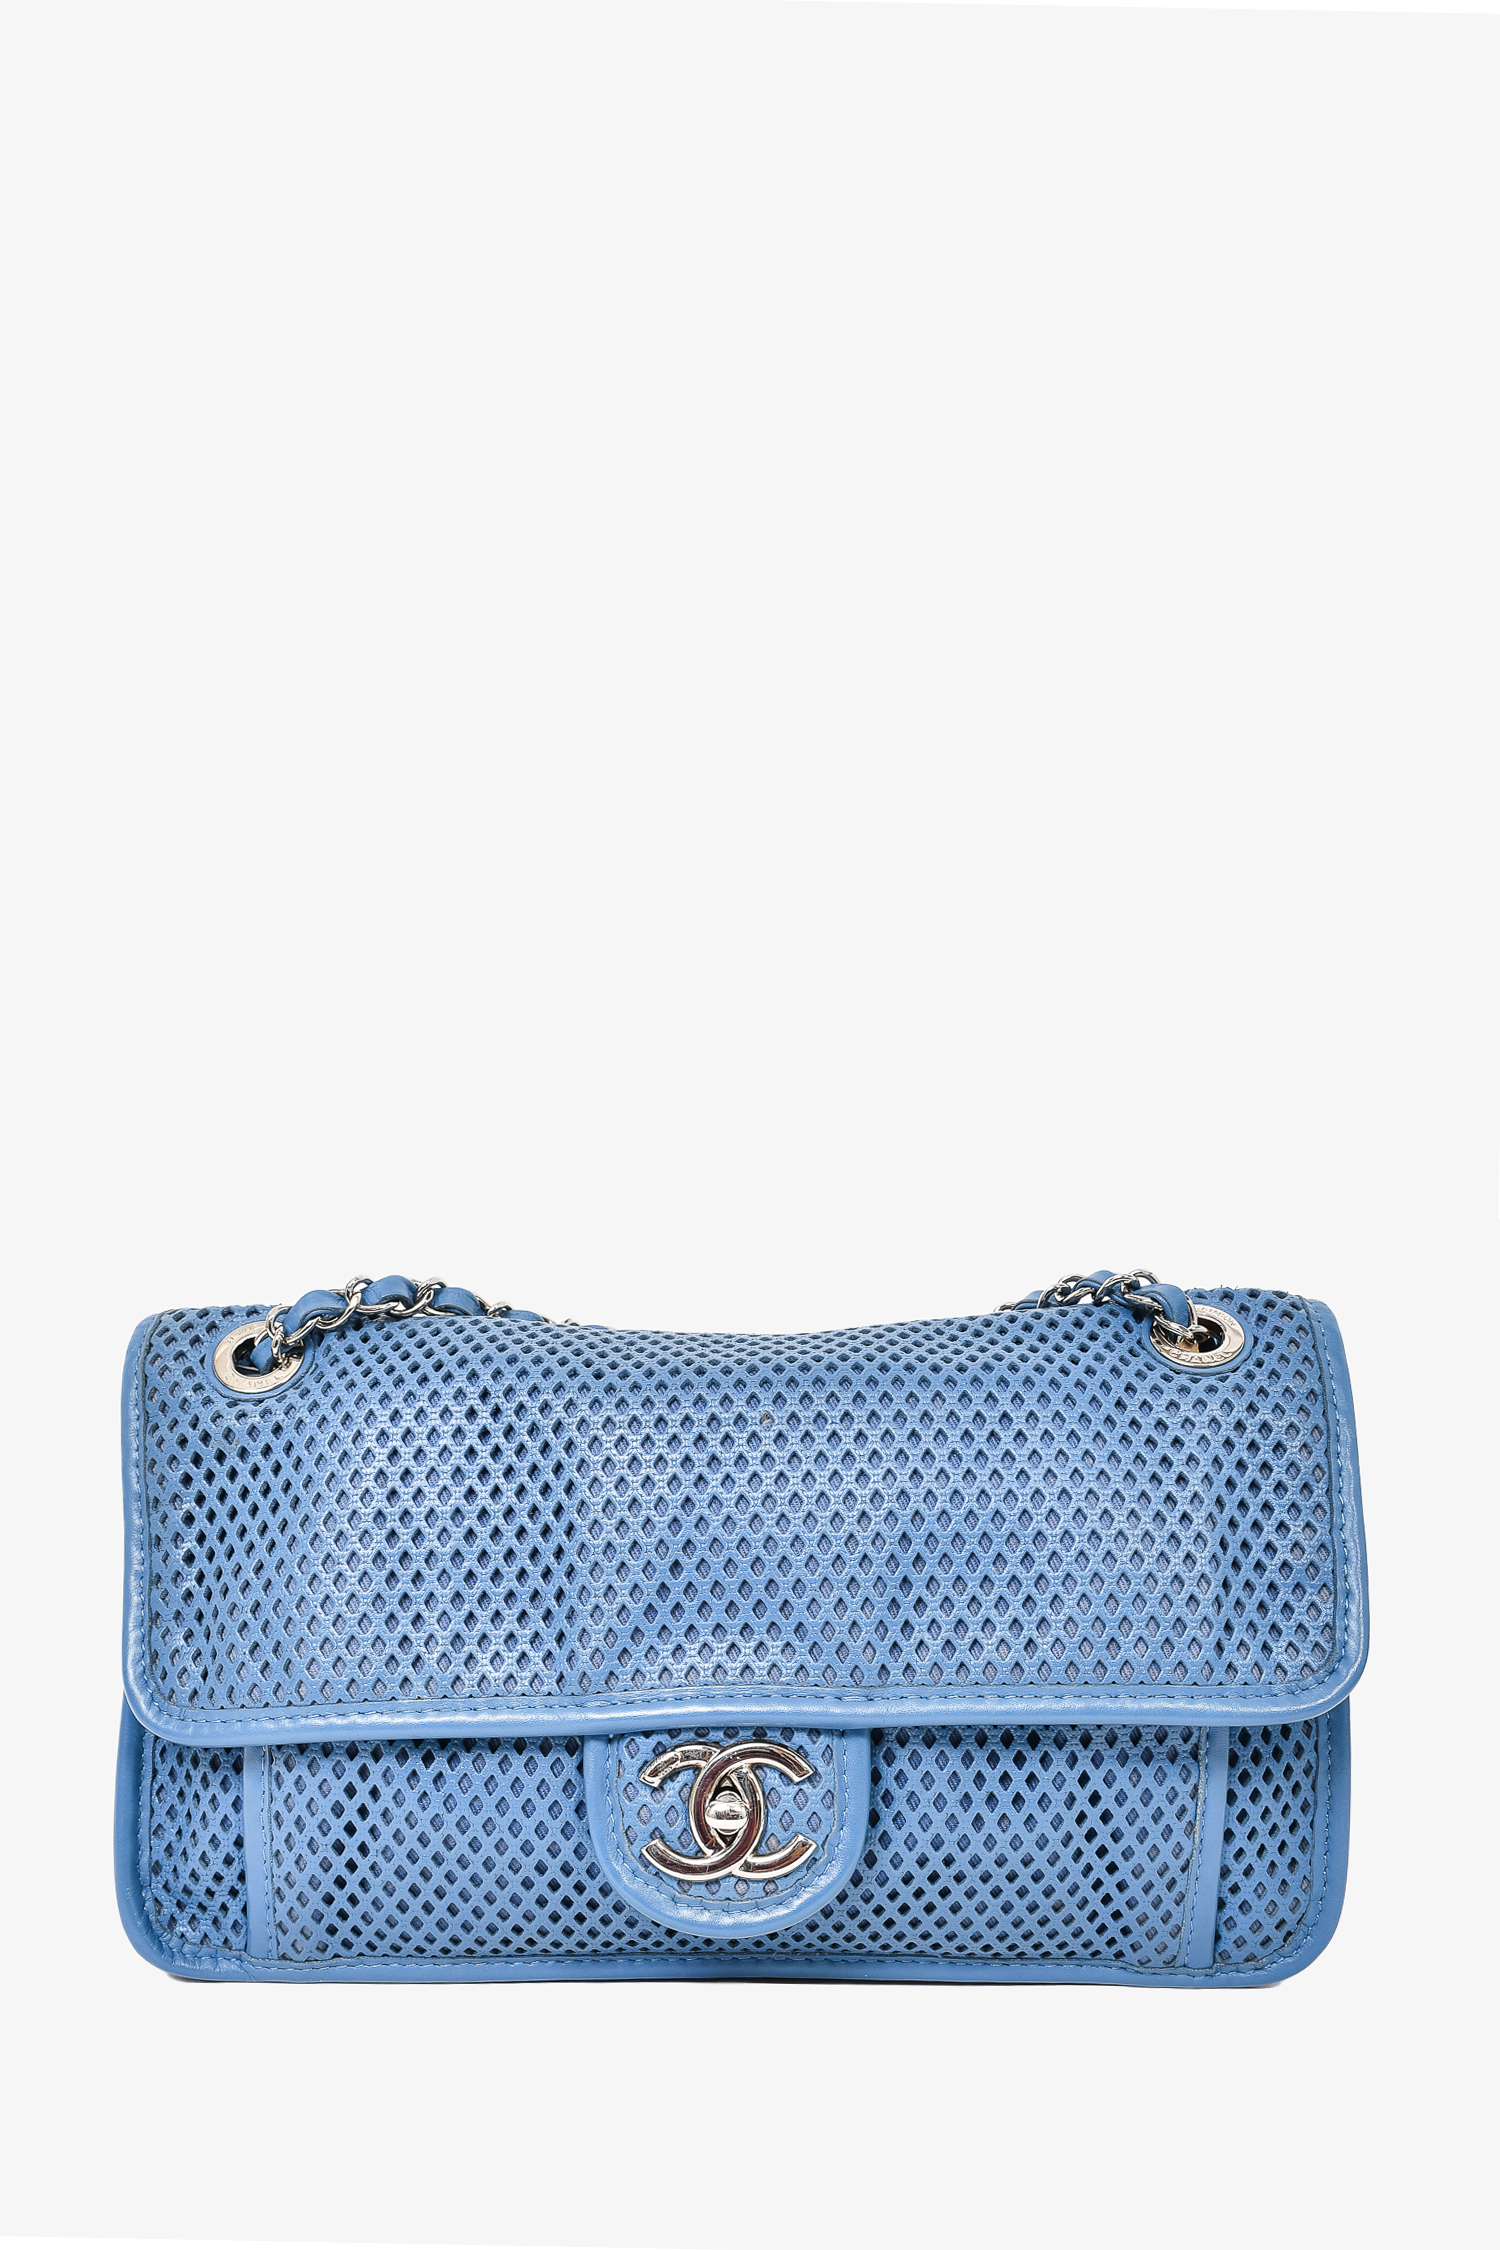 Chanel Blue Perforated Leather 2012/2013 Medium 'Up In The Air